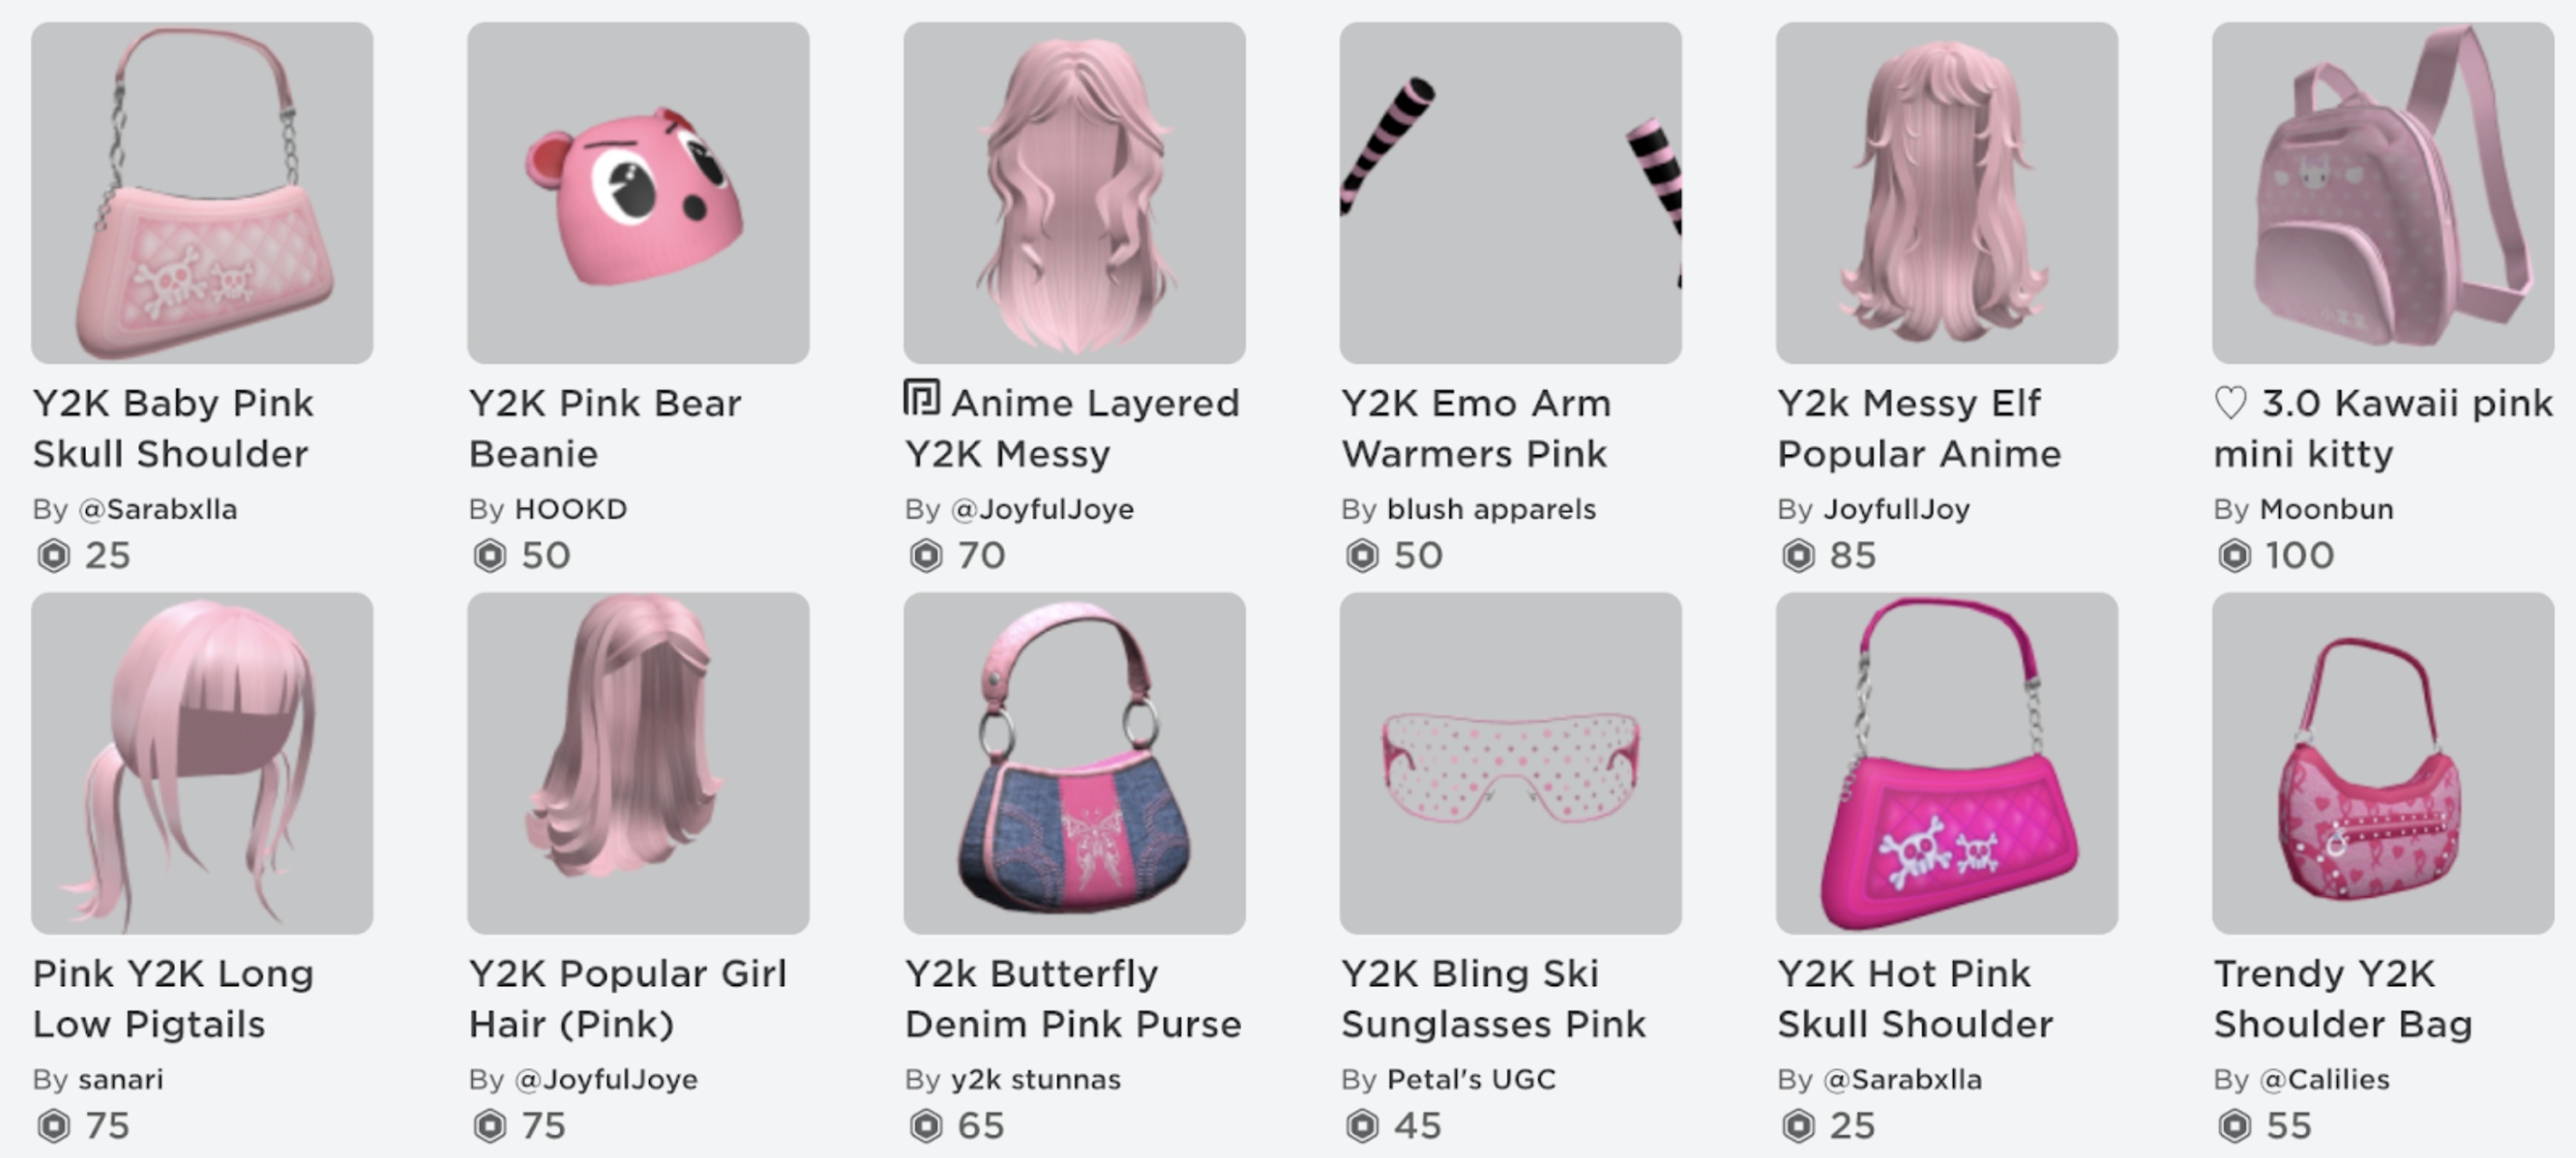 Roblox's Y2K Avatar Store